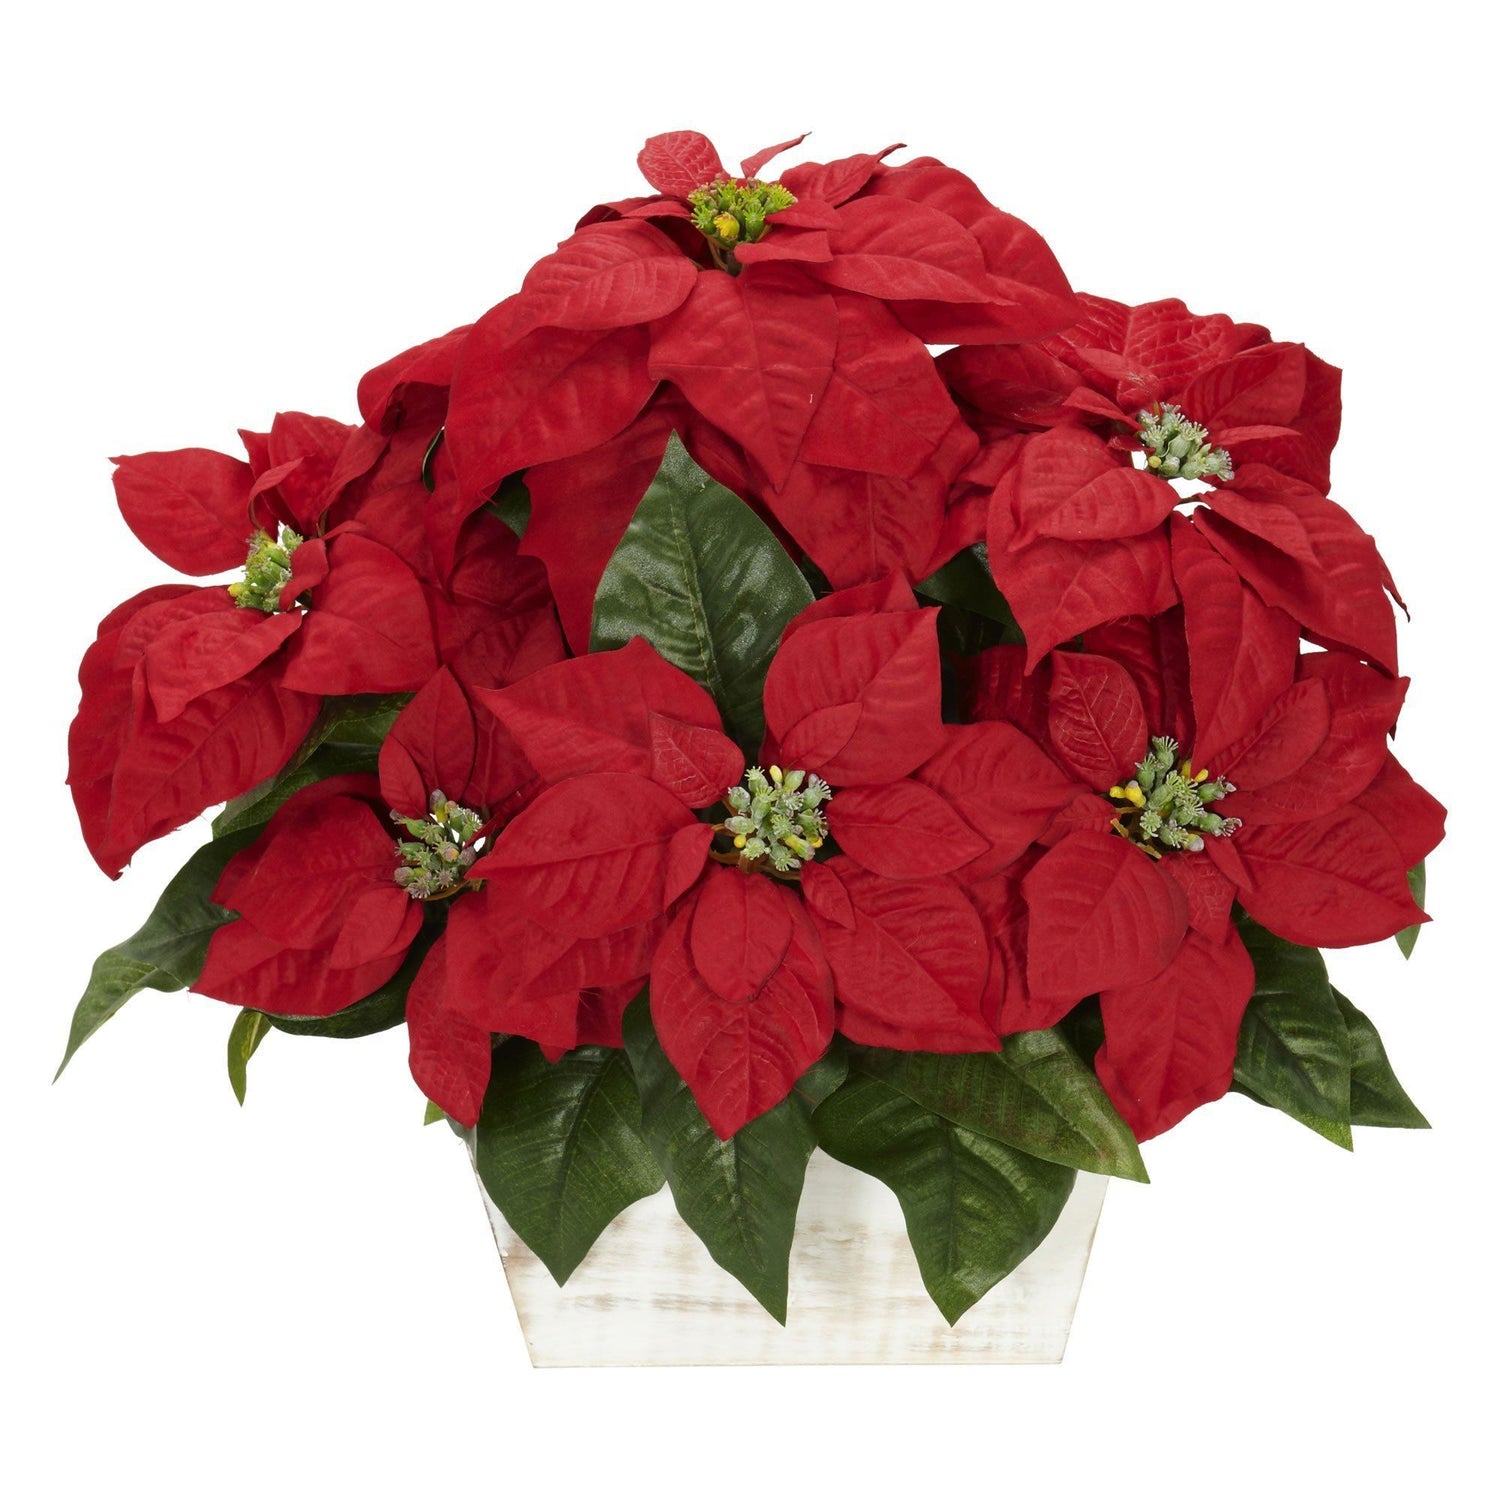  Potted Poinsettias Artificial Christmas Flowers 7